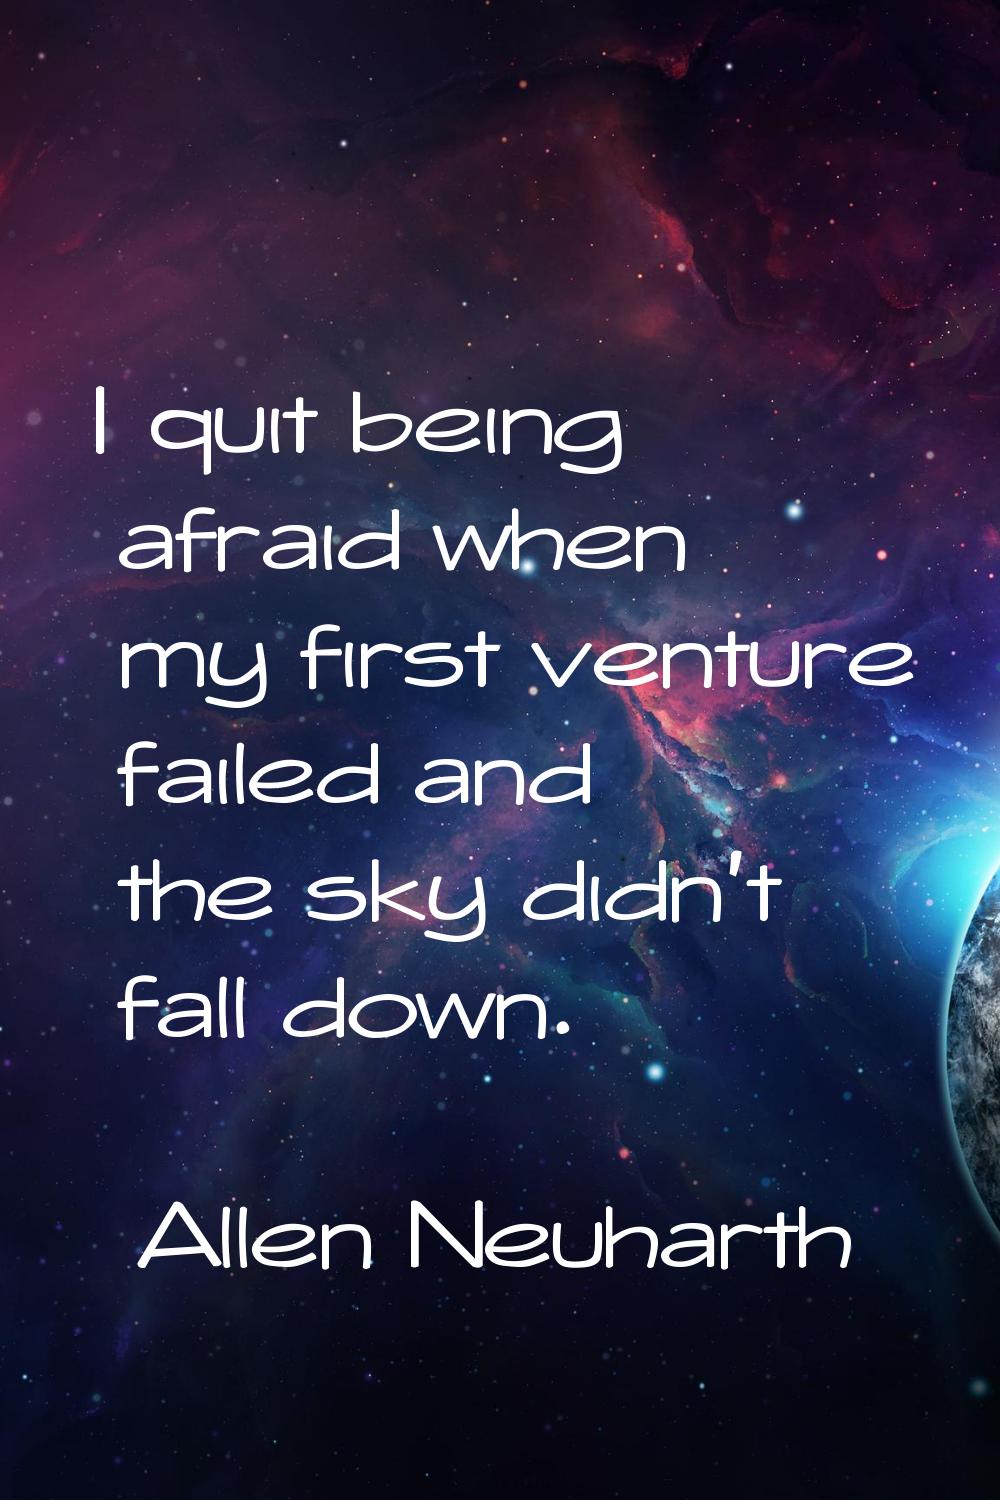 I quit being afraid when my first venture failed and the sky didn't fall down.